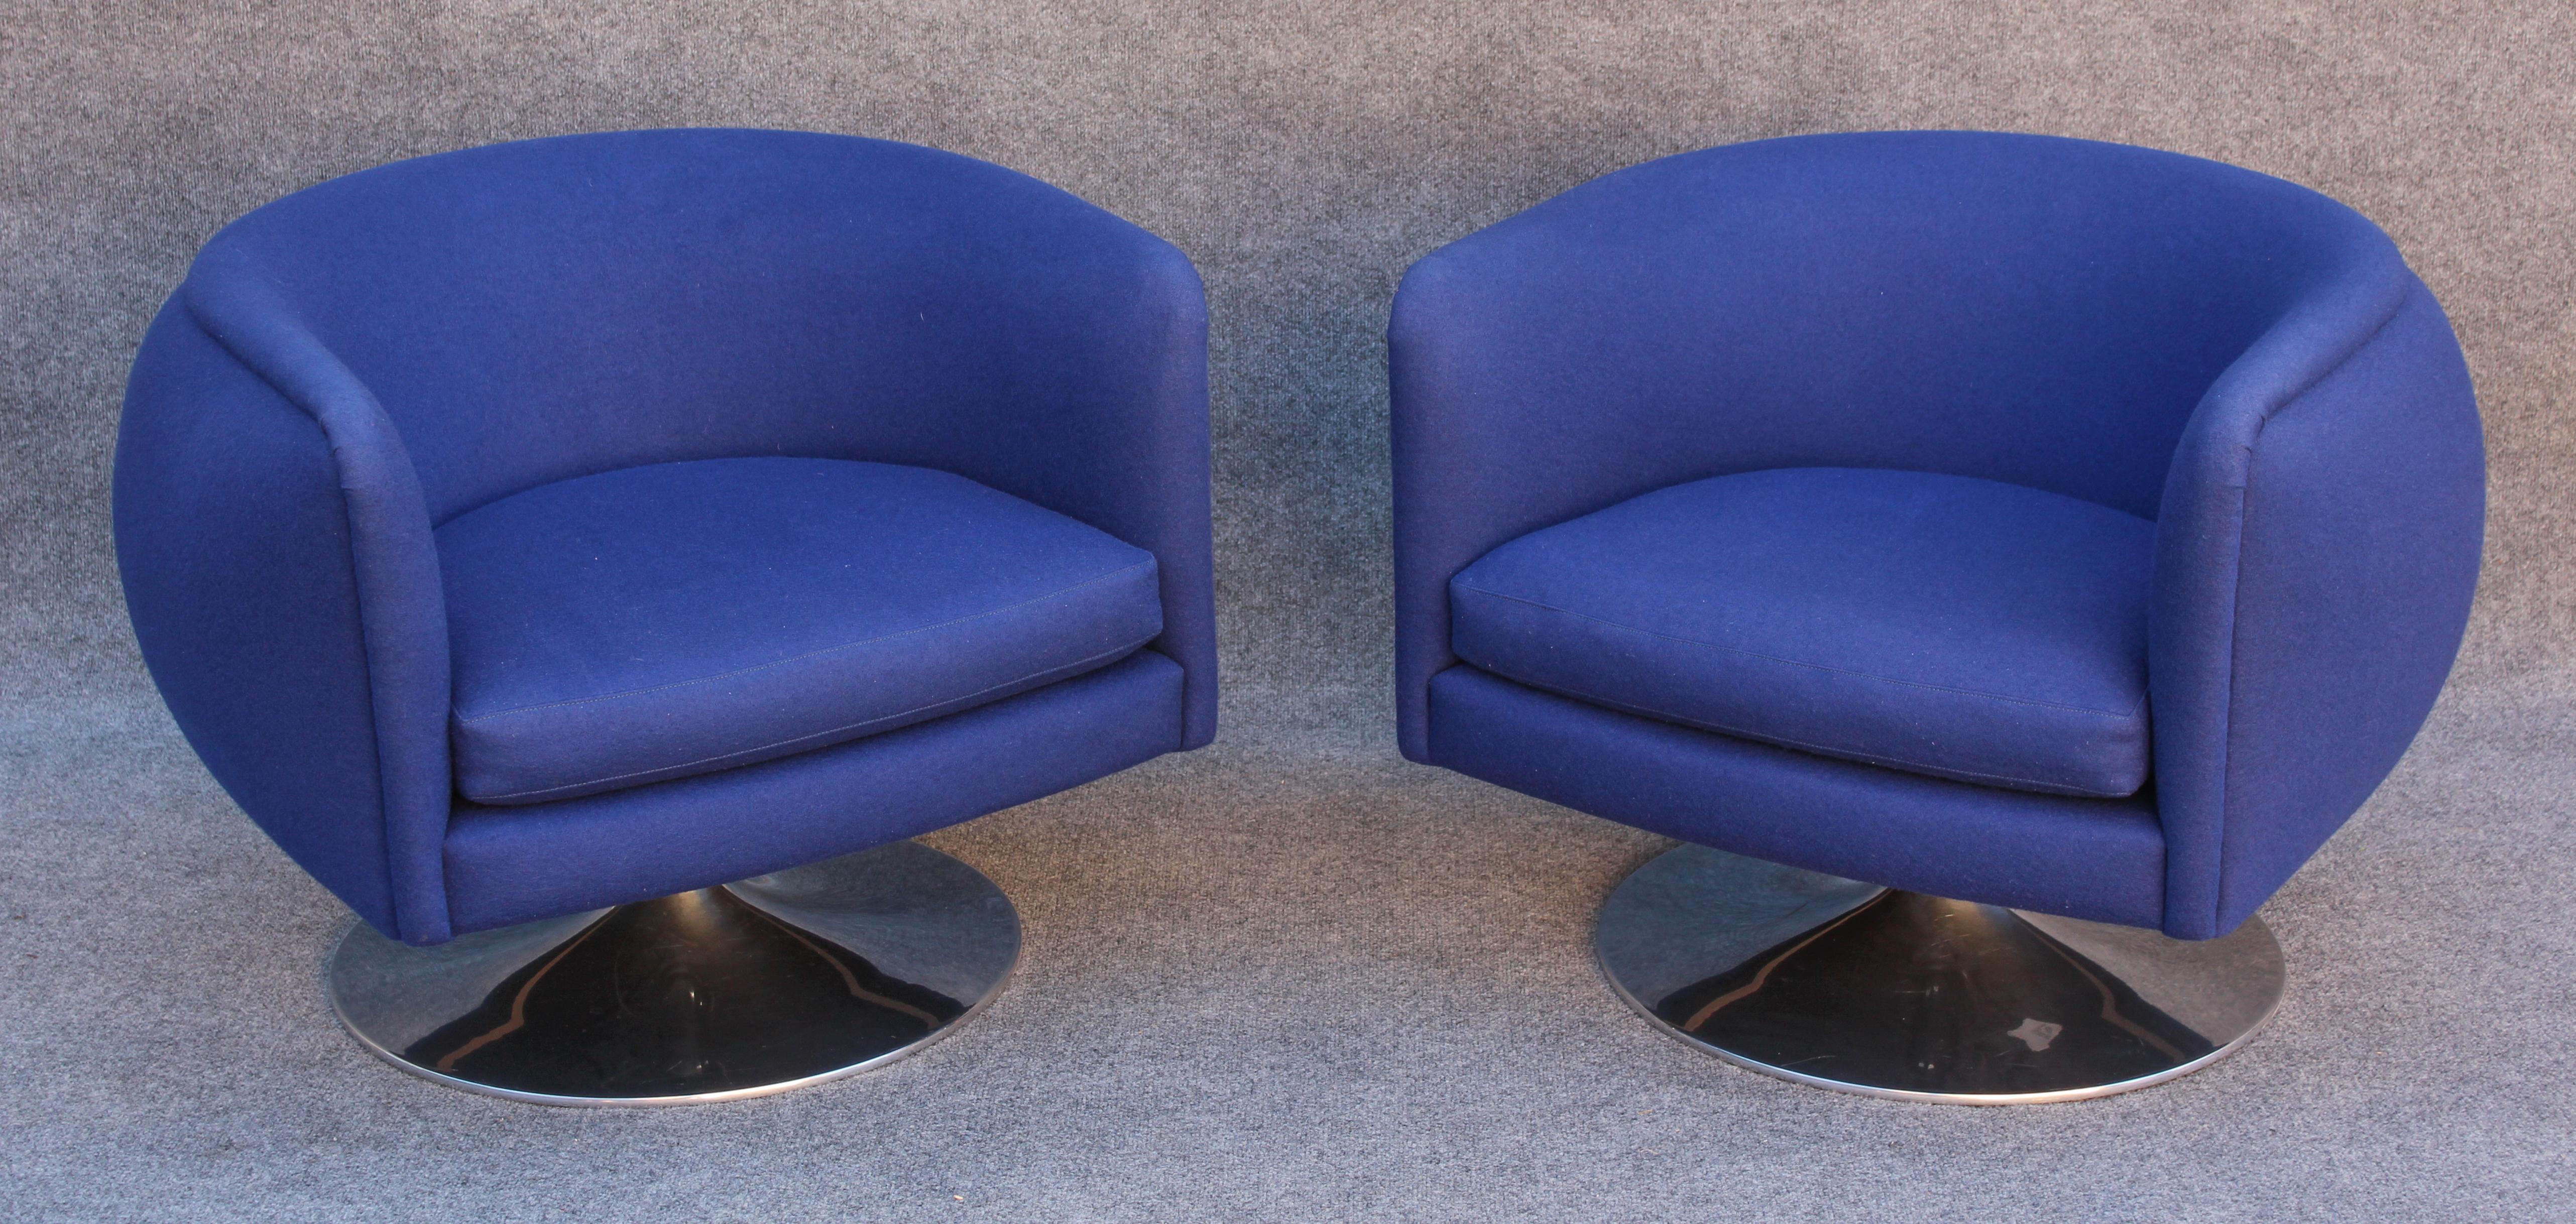 Aluminum Joe D'Urso for Knoll Pair of Swivel Club Lounge Chairs in Deep Blue Wool Blend For Sale